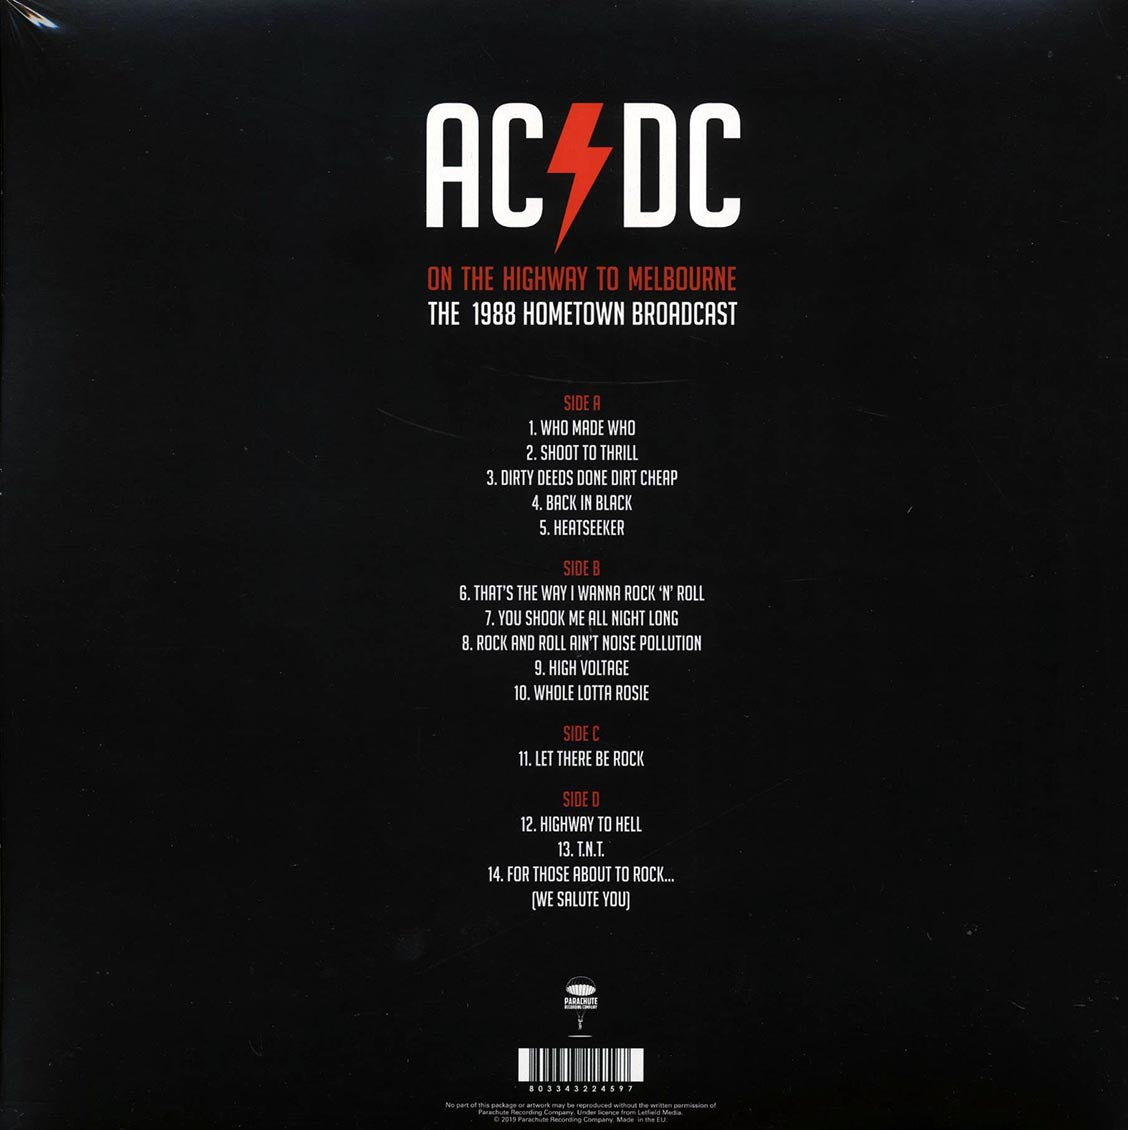 AC/DC - On The Highway To Melbourne: The 1988 Hometown Broadcast (2xLP) - Vinyl LP, LP